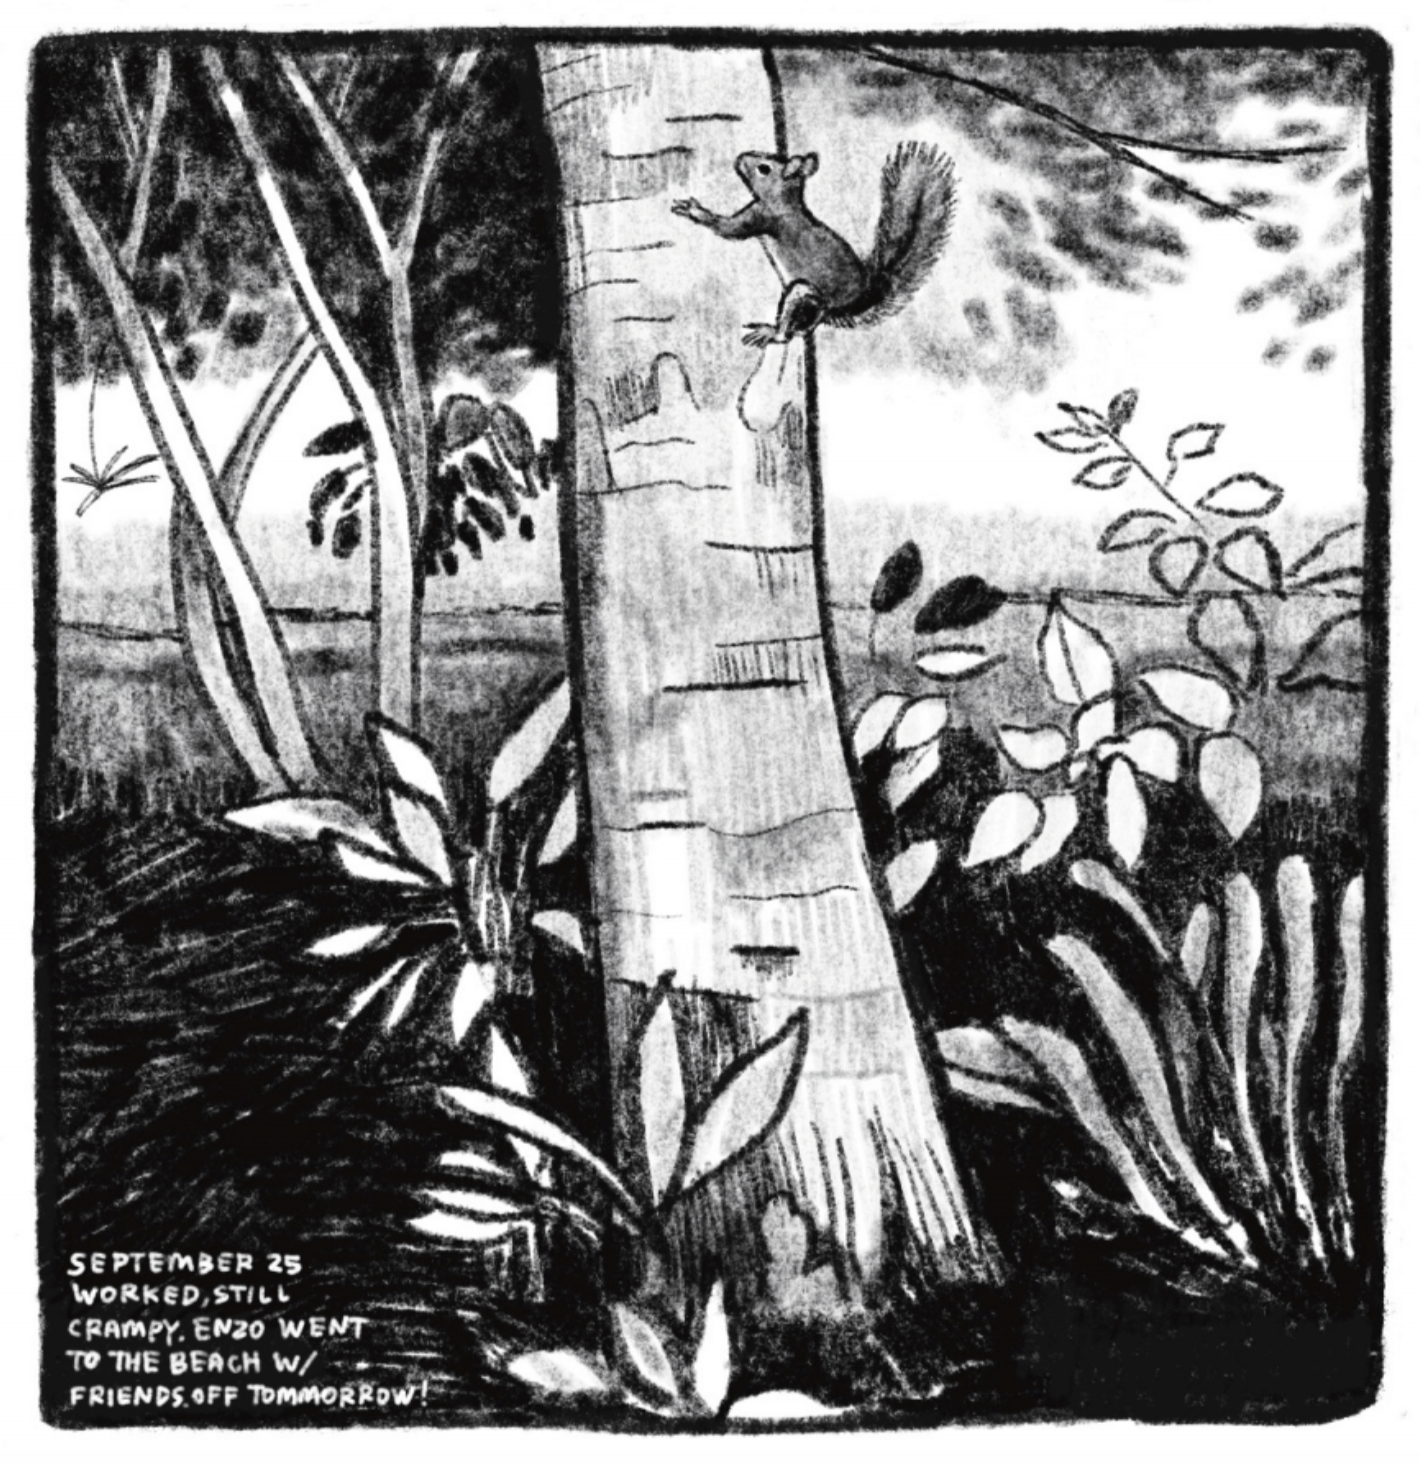 A tree trunk stands out among smaller plants and shrubs. A squirrel is climbing the tree, its tale sticking straight up. There are trees with thinner trunks and branches in the background. It is a shady scene, with leaves and branches overhead. â€œSeptember 25. Worked. Still crampy. Enzo went to the beach with friends. Off tomorrow!â€